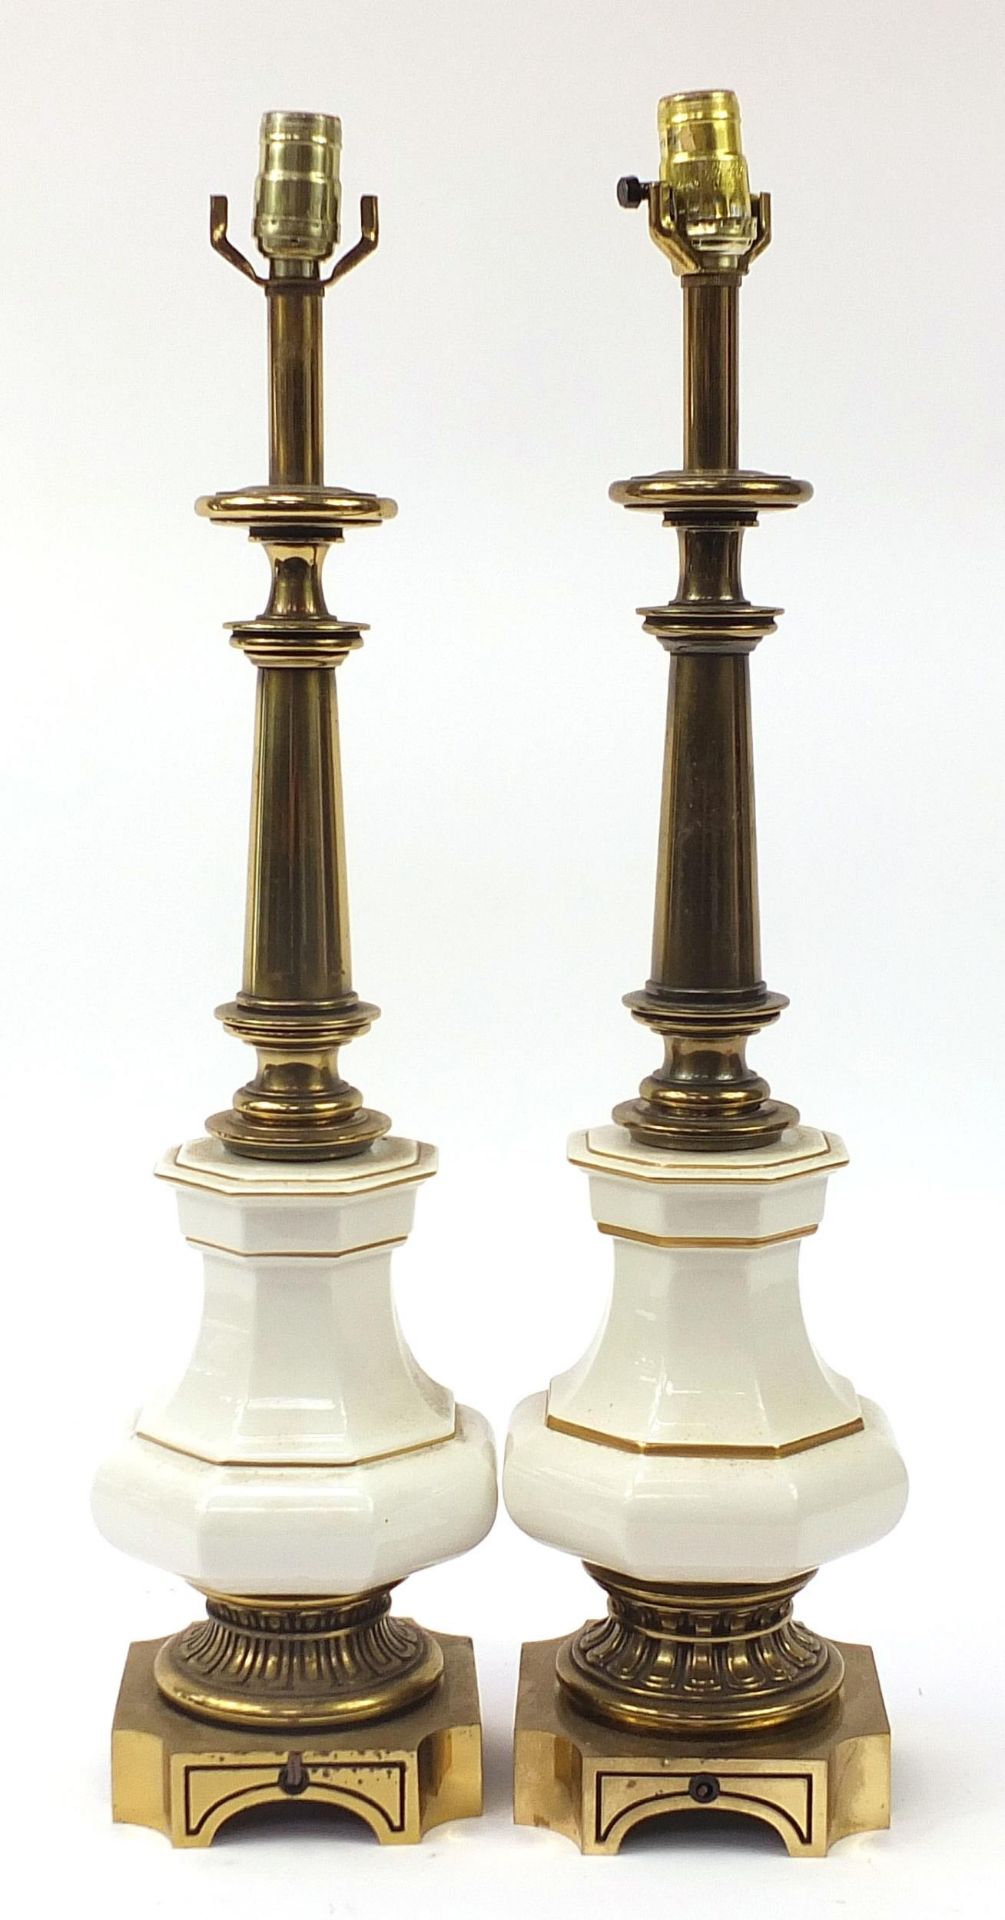 Pair of porcelain and brass Stiffel design table lamps, each 69cm high - Image 2 of 3